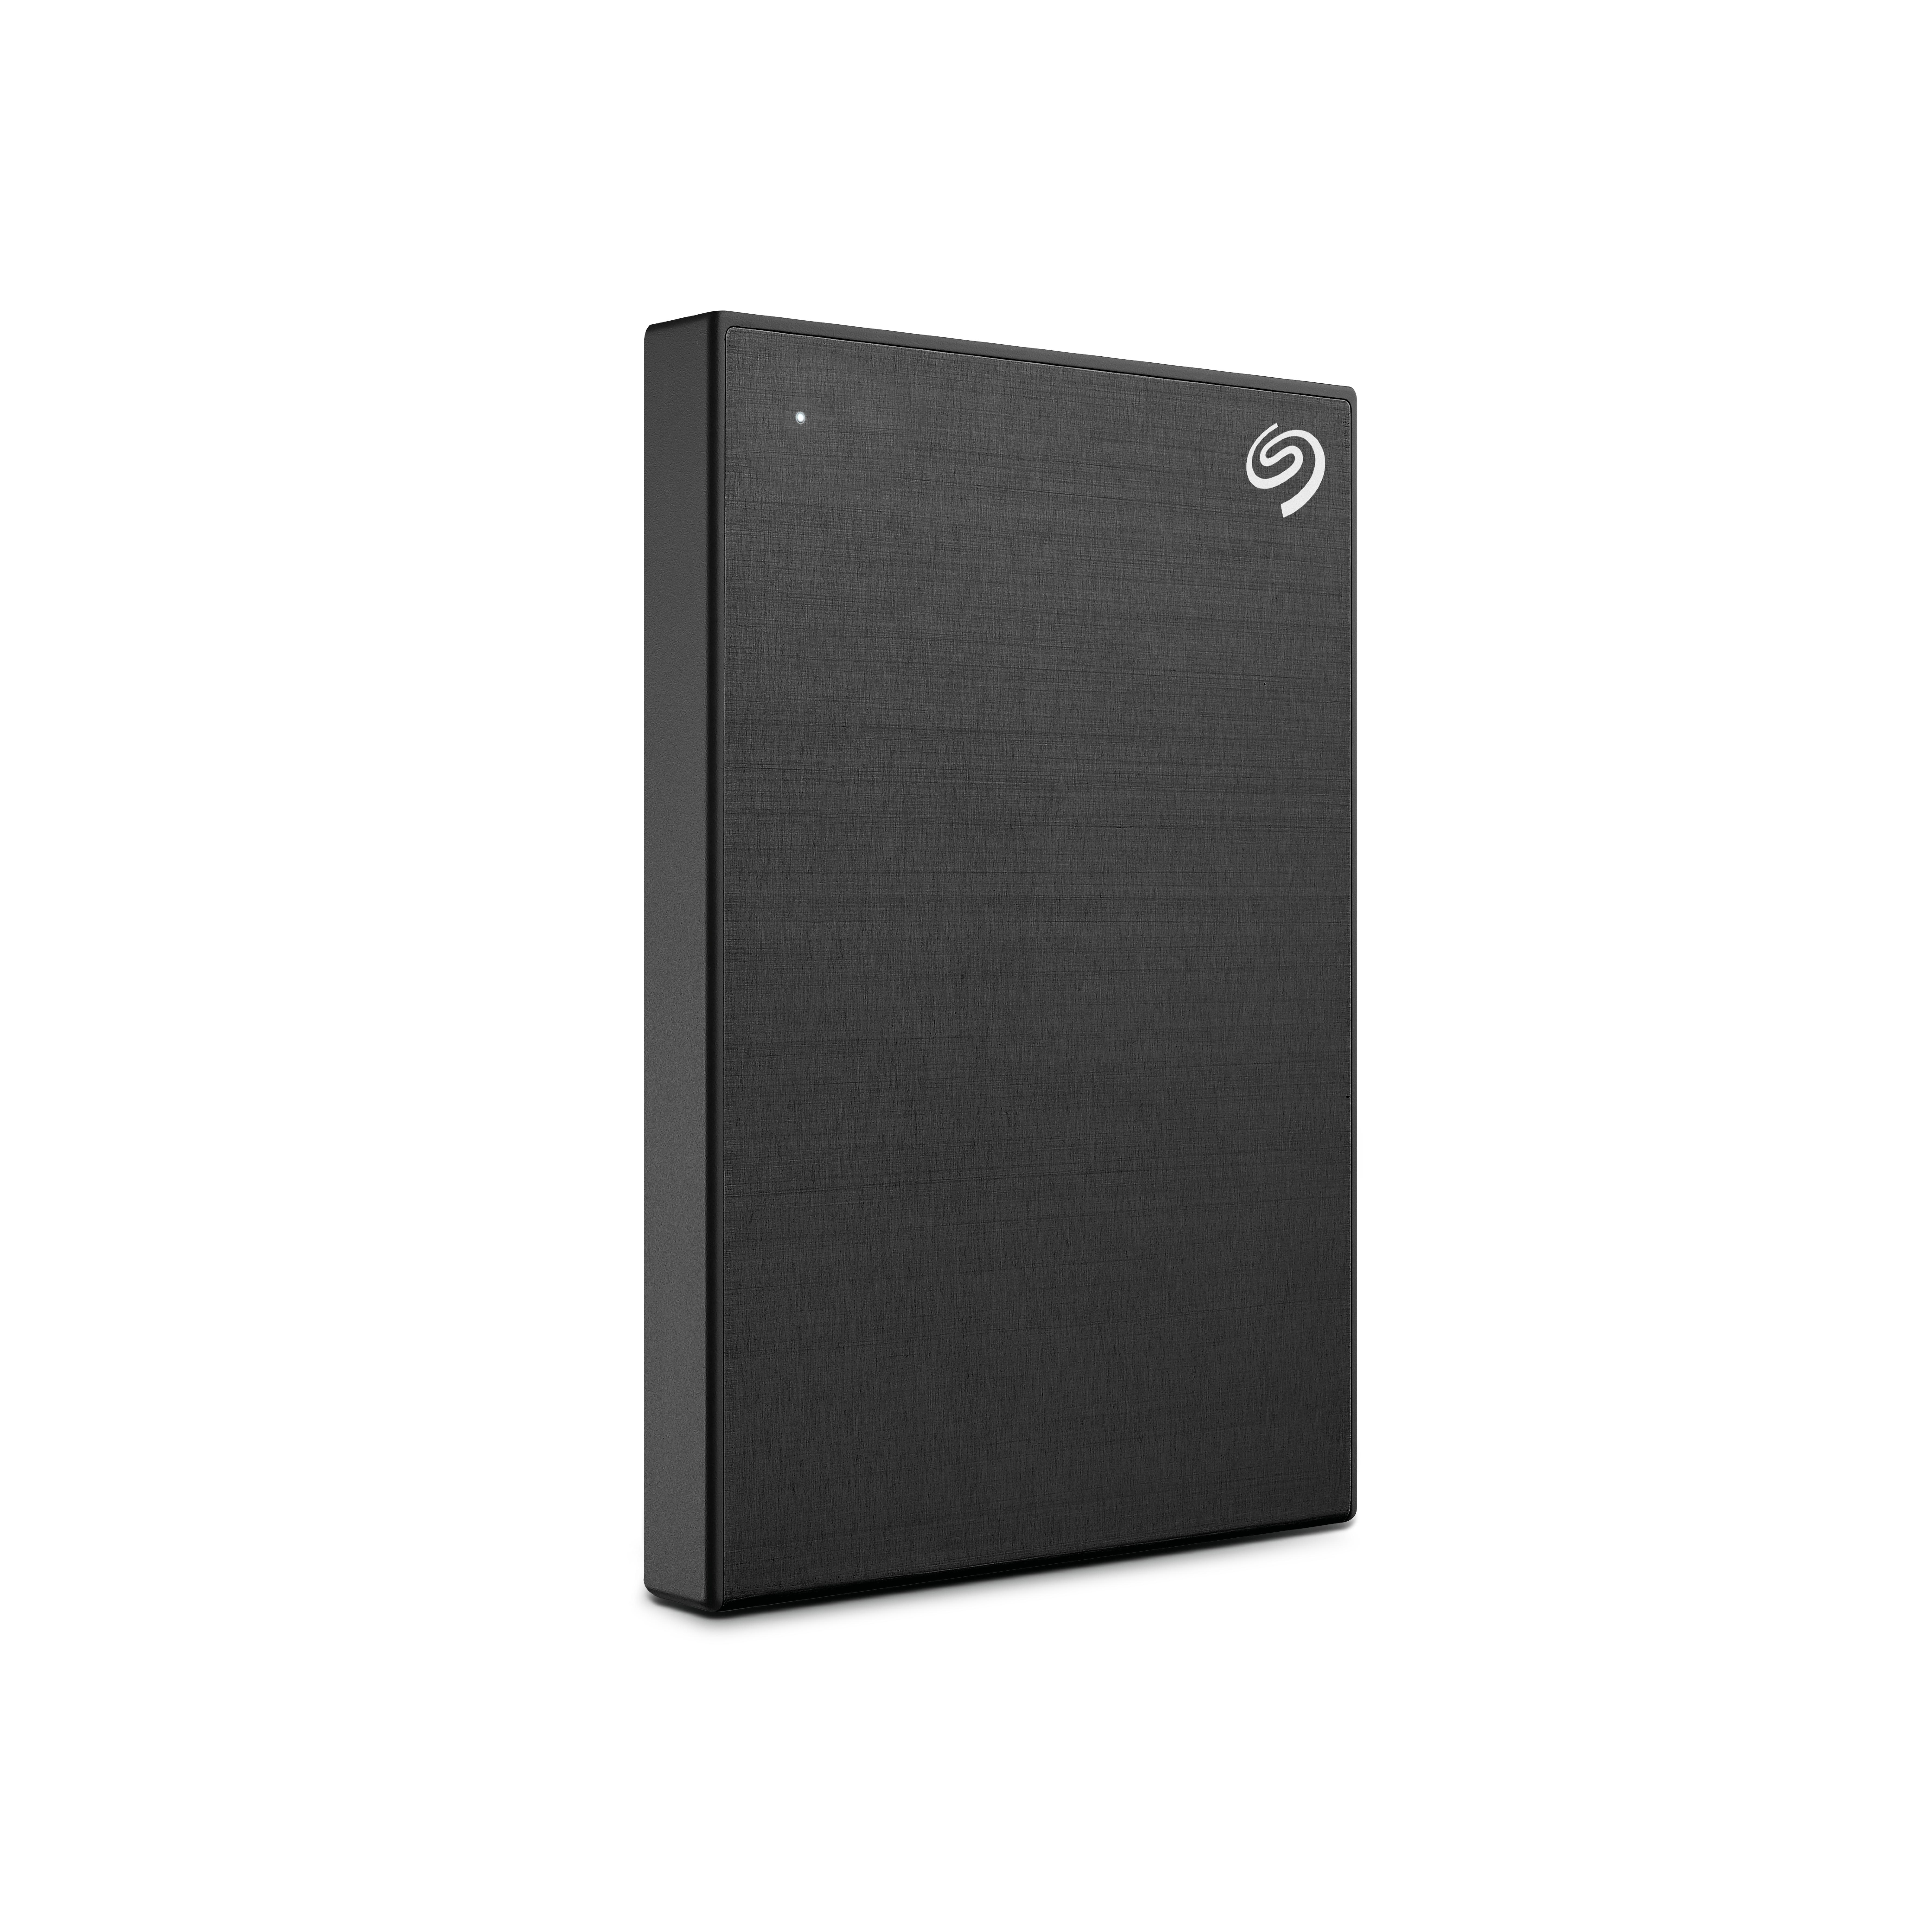 SEAGATE Zoll, One Touch 1 TB extern, HDD, Schwarz 2,5 mobile Festplatte,